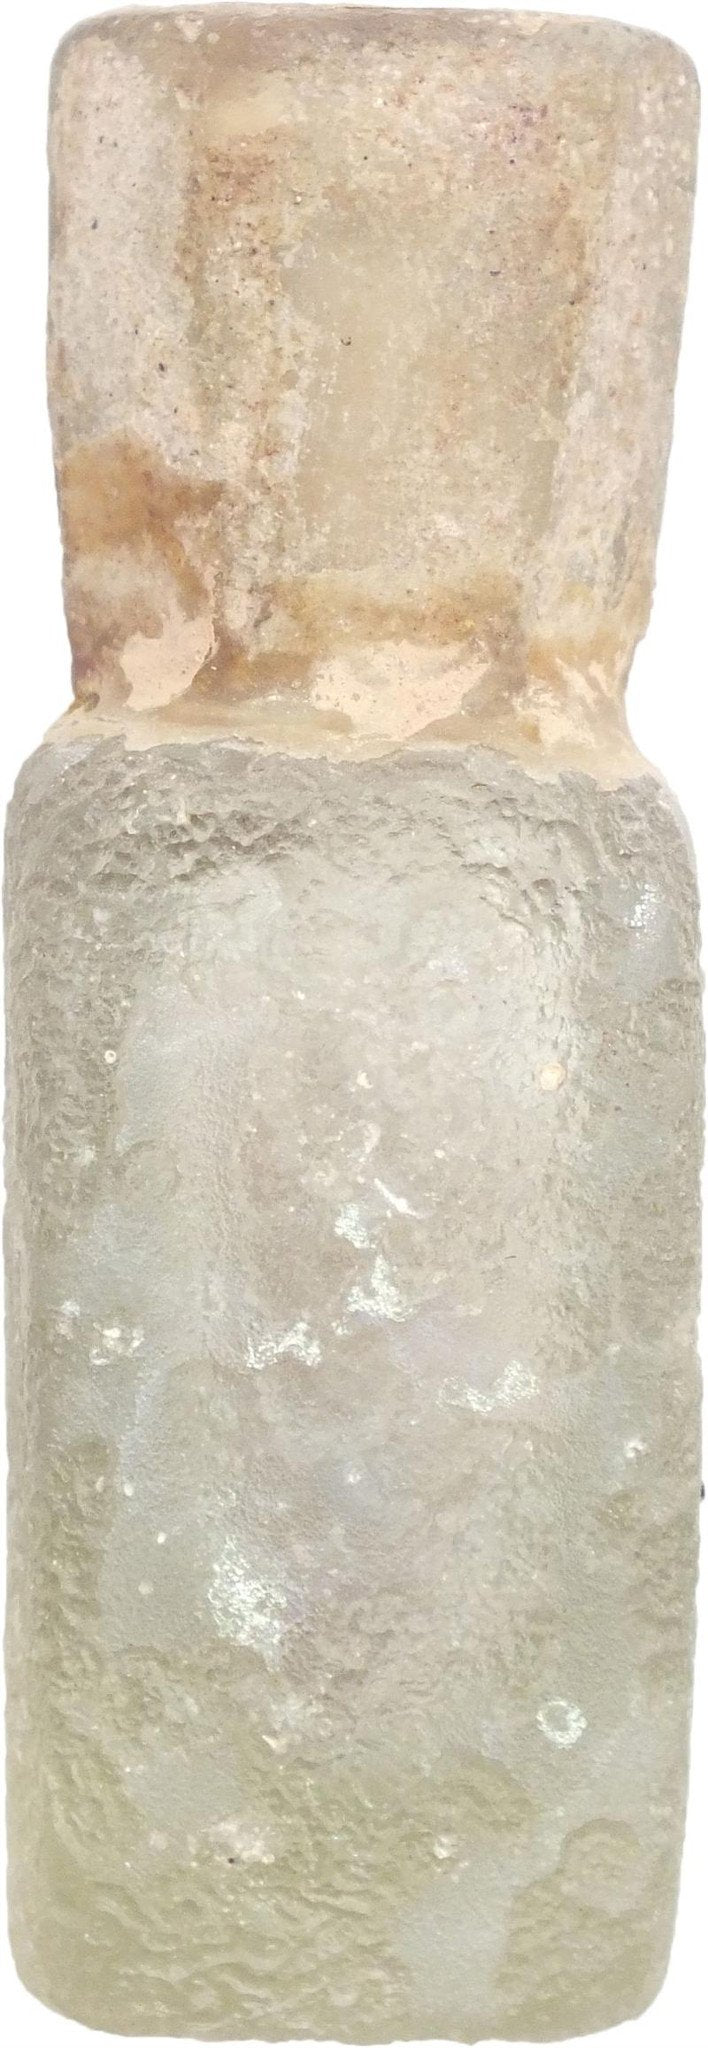 Roman Core Formed Glass Scent Bottle C.600 Bc - Product